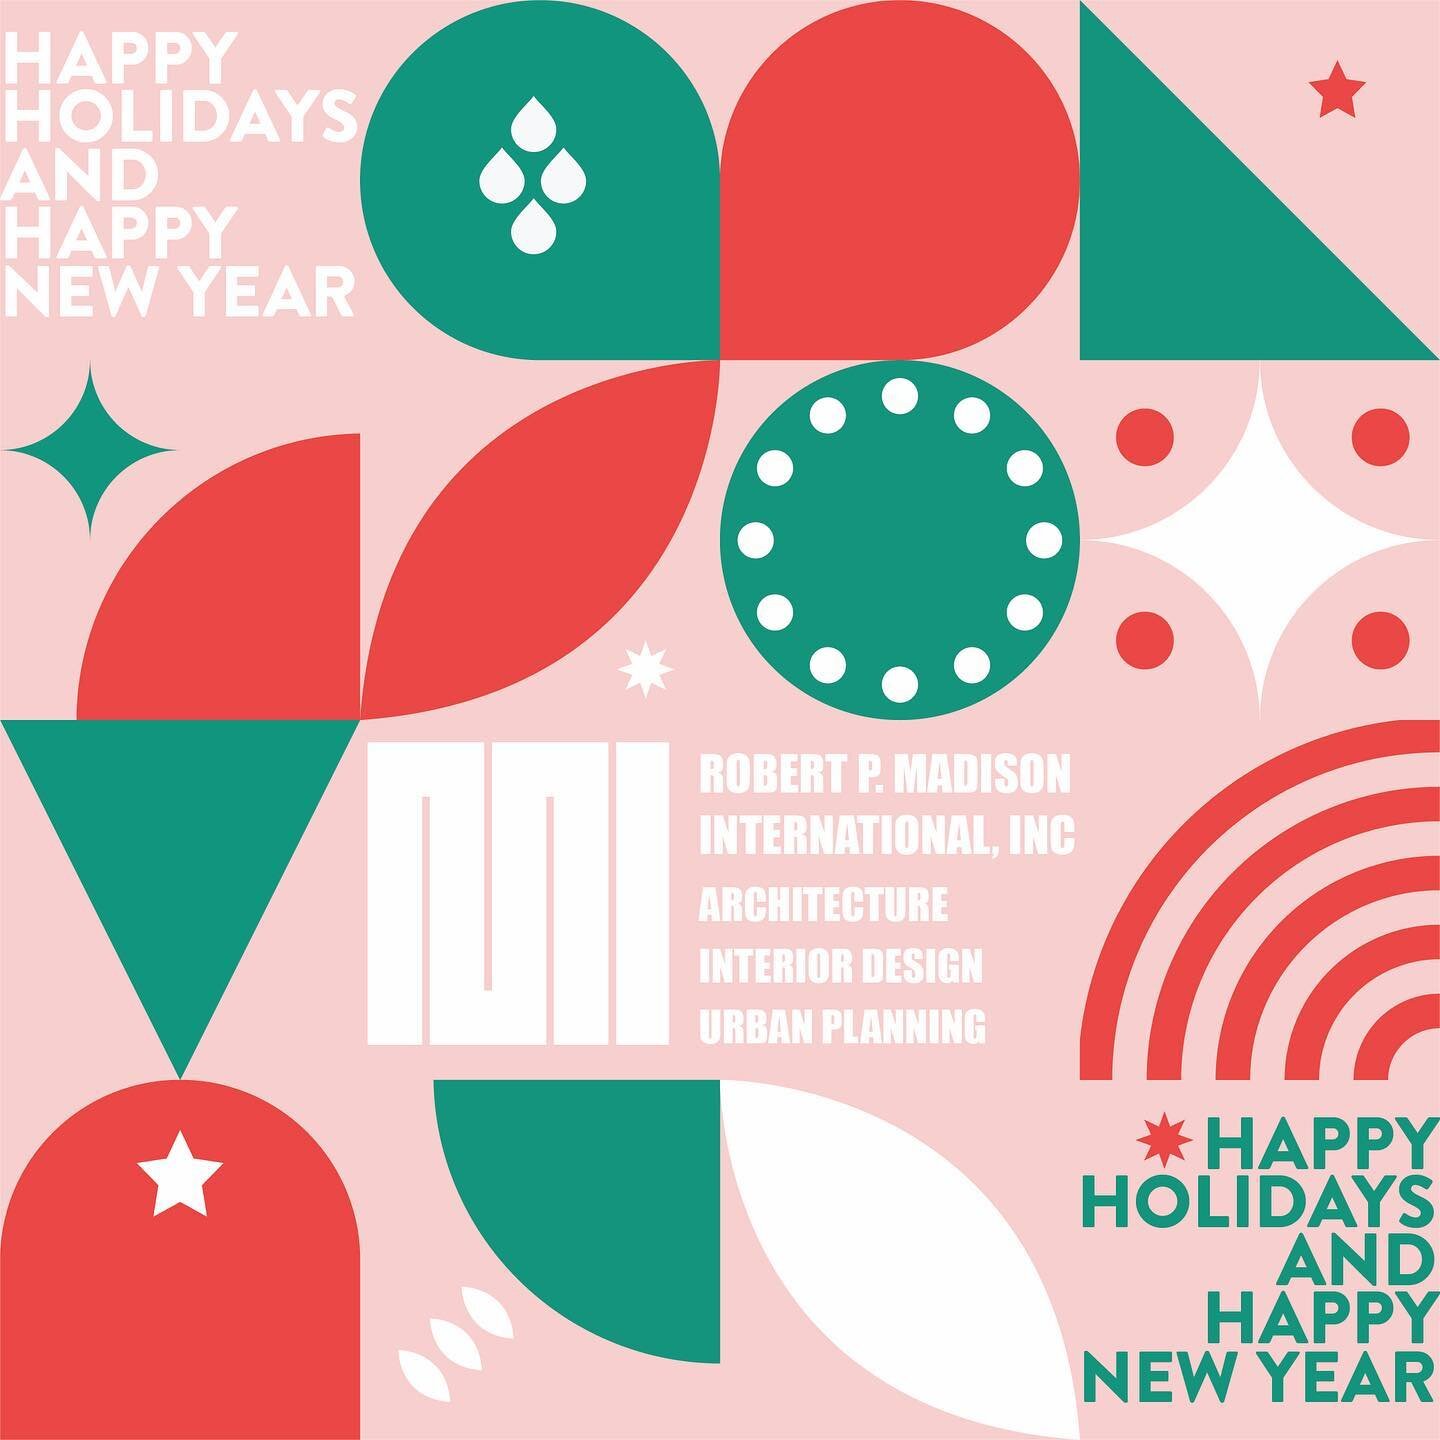 Seasons Greetings from RPMI we have so much to share with you all in 2022!

&ldquo;Improving lives through design, mentorship and service to the community&rdquo; 

#happyholidays #tistheseason #happynewyear #architecture #cleveland #graphicdesign #th